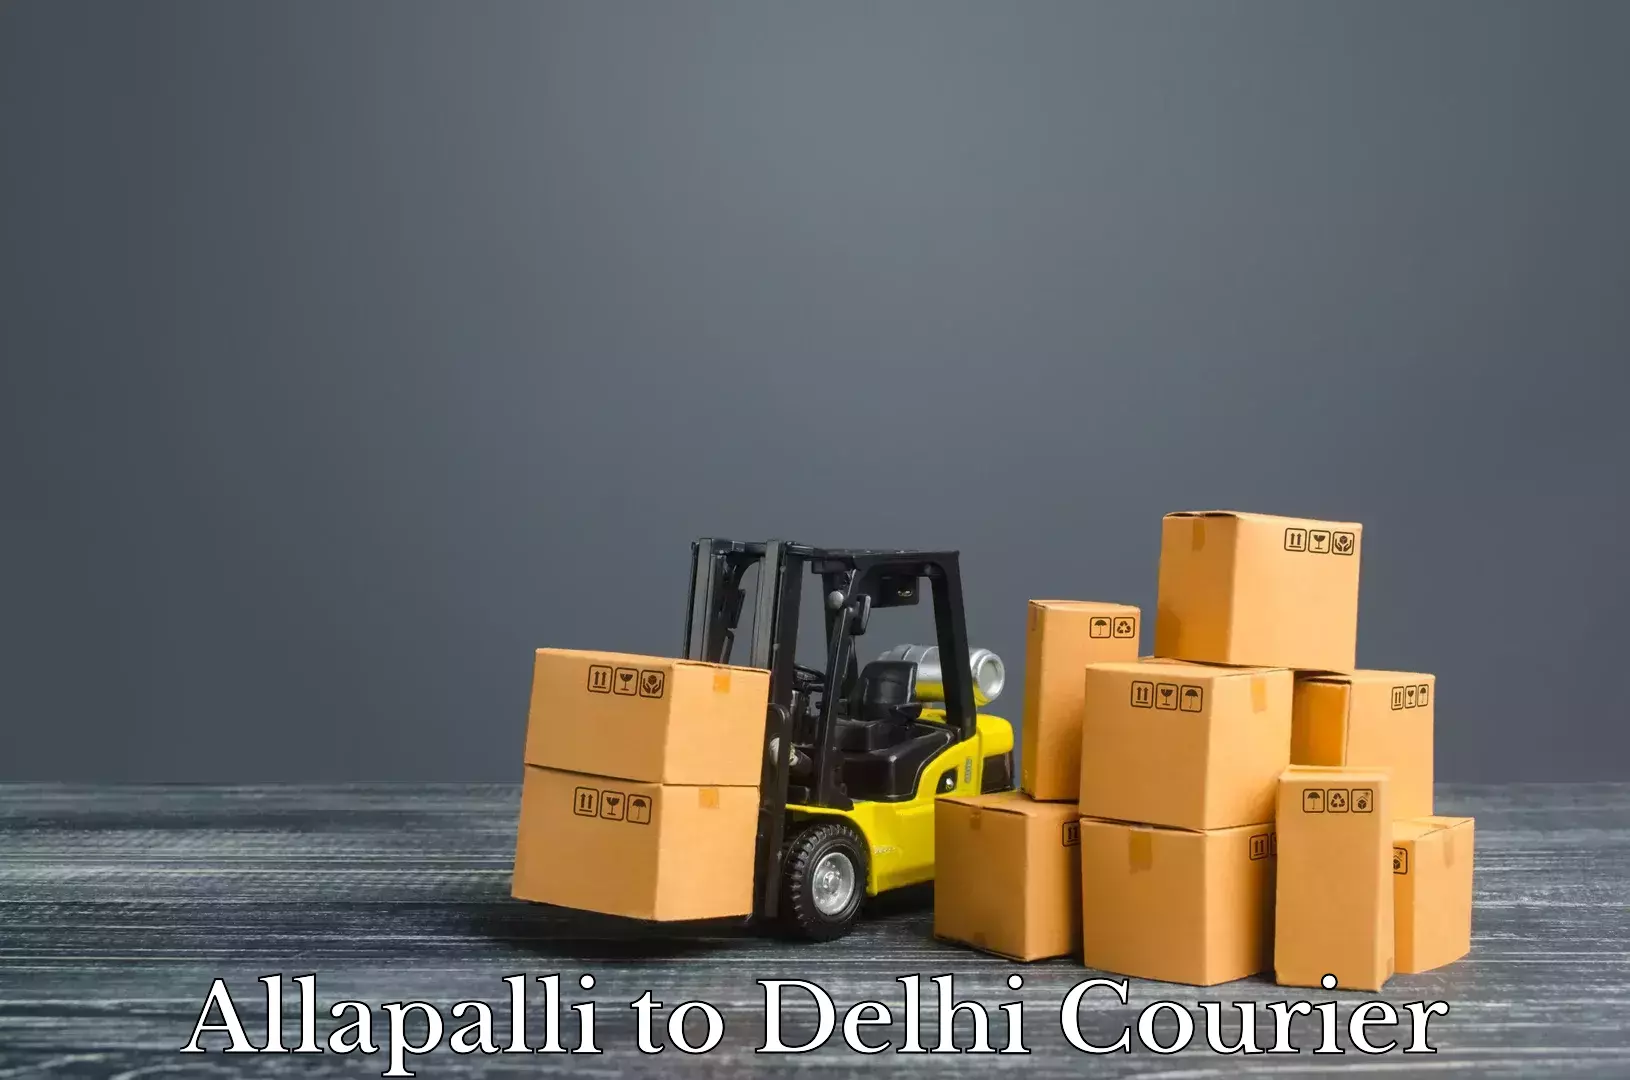 Luggage transport consulting Allapalli to University of Delhi